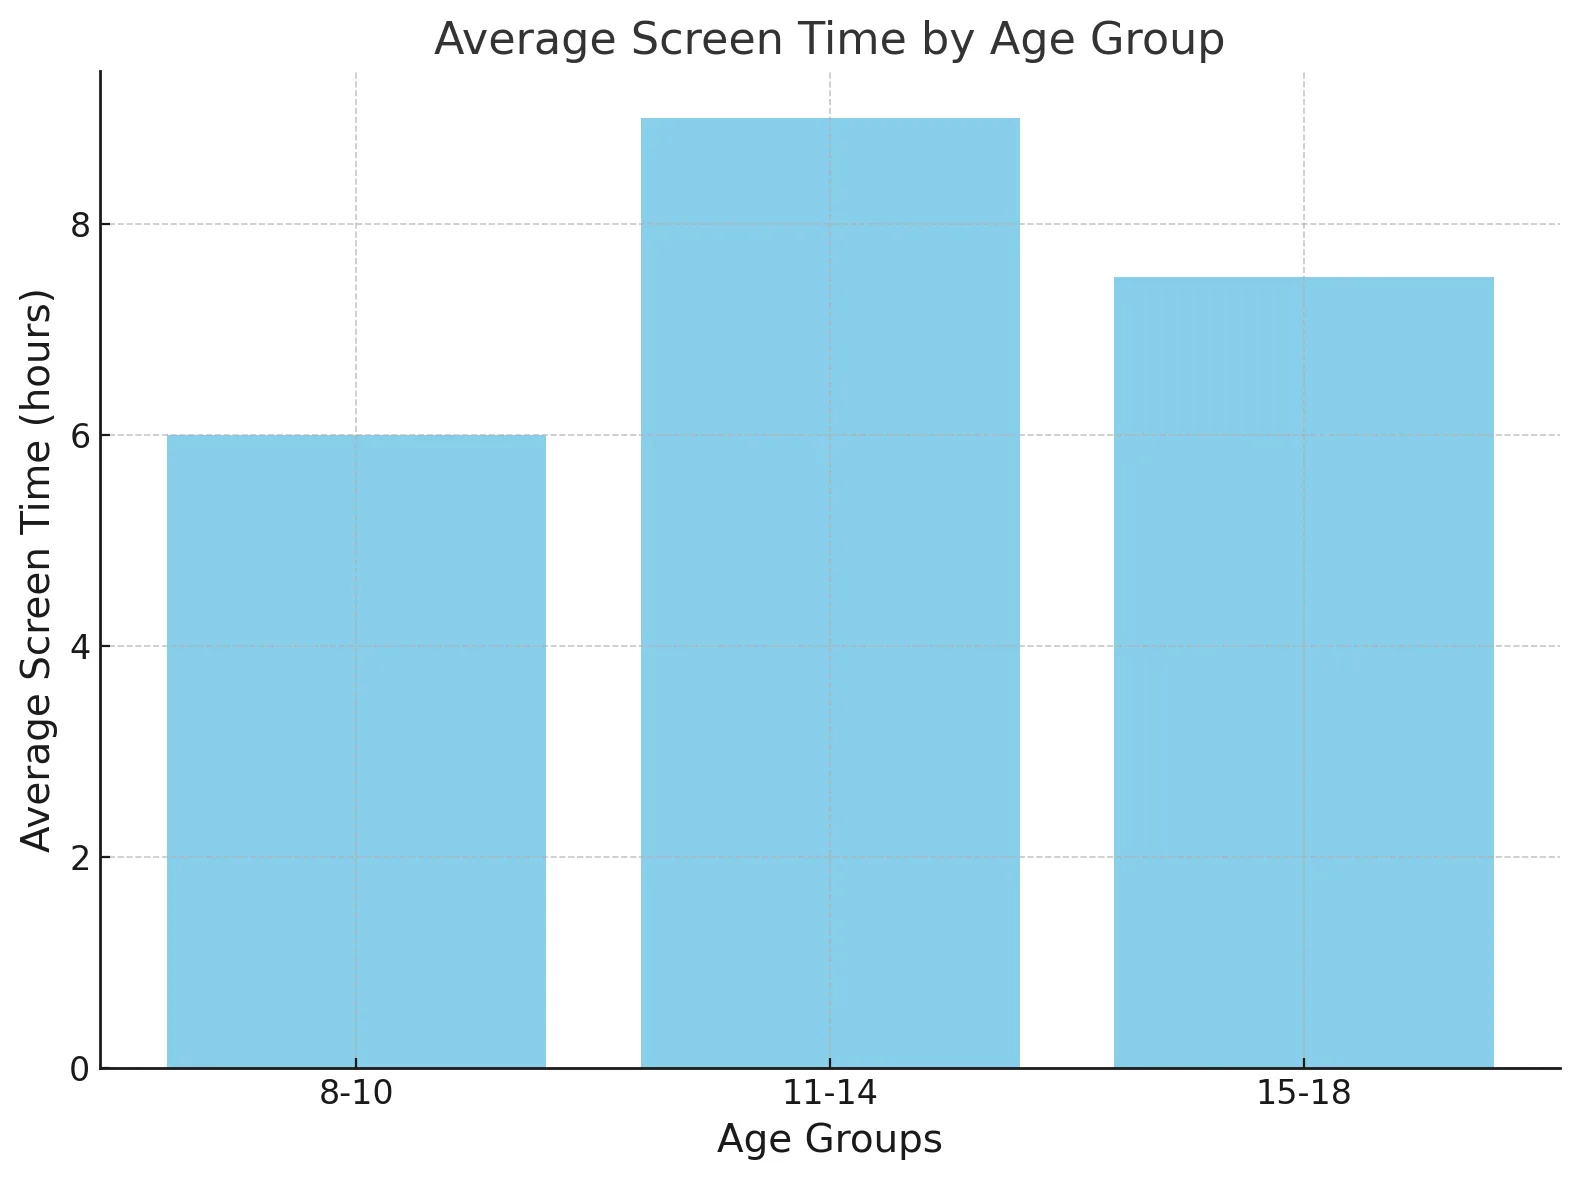 Average screen time by age group